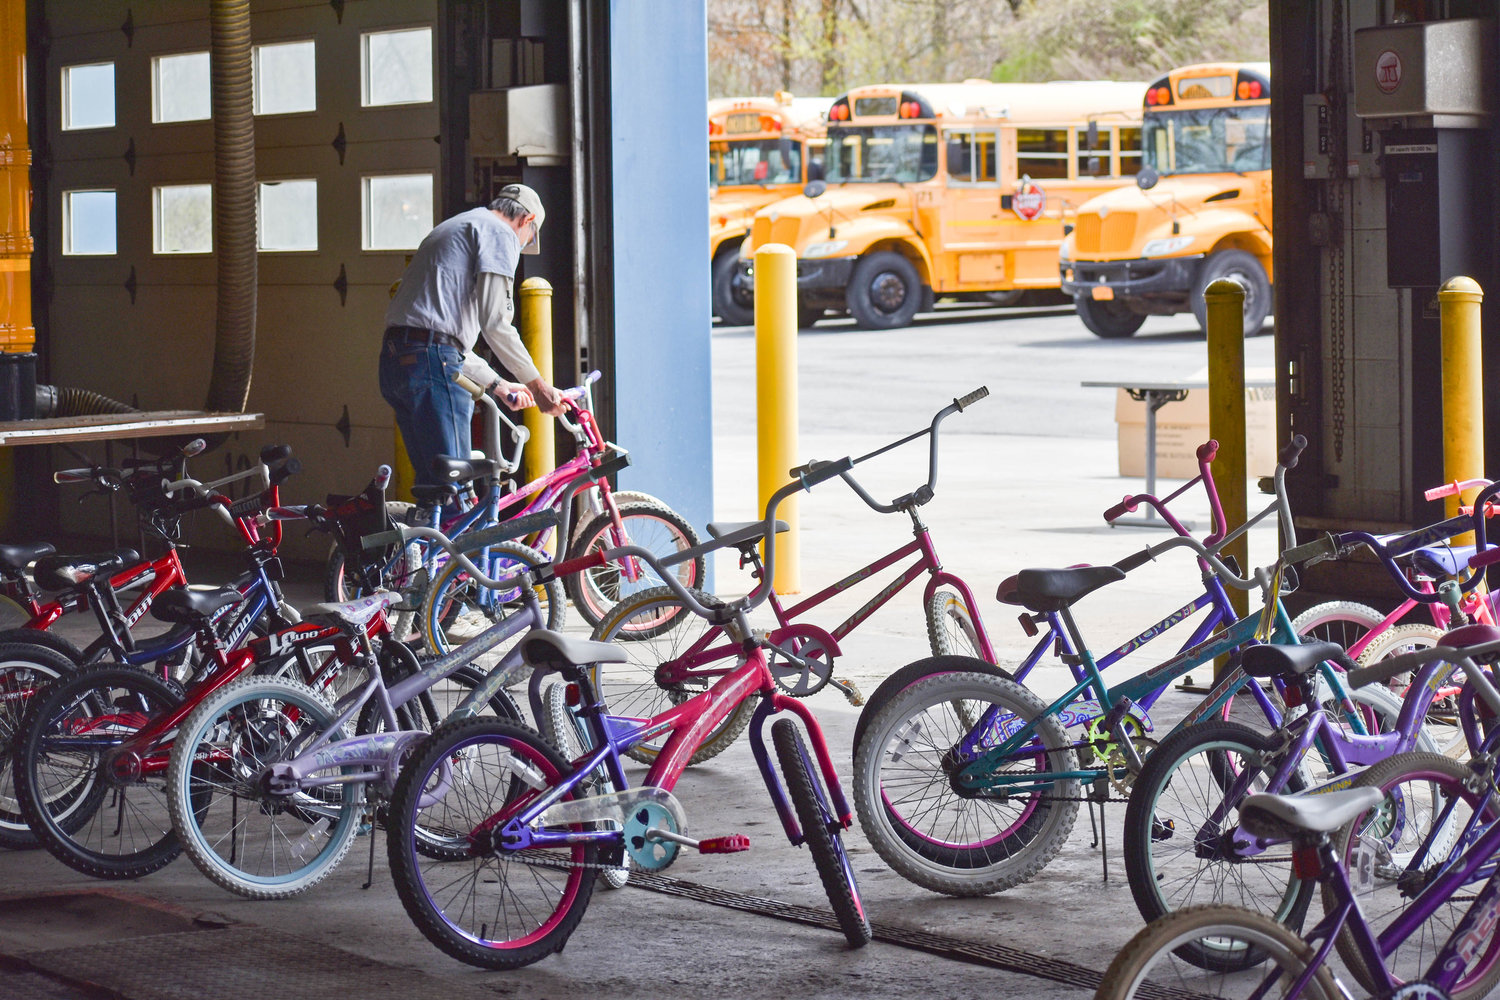 A volunteer organizes leftover inventory at the end of Community Bikes’ giveaway.